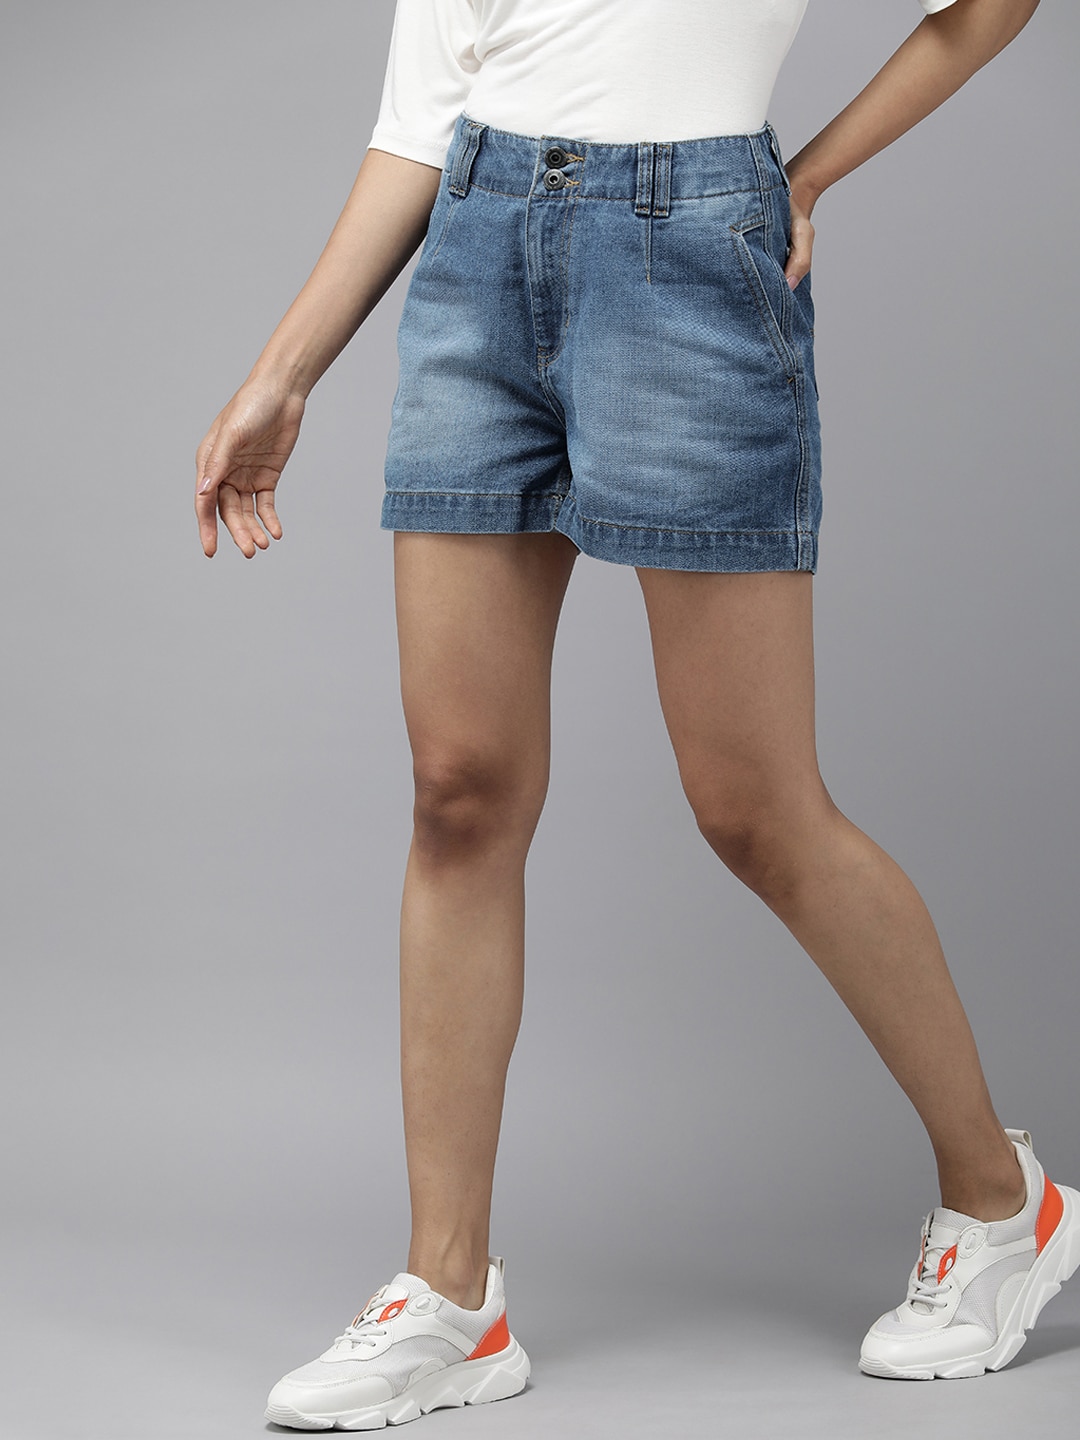 The Roadster Lifestyle Co. Women High-Rise Denim Shorts Price in India